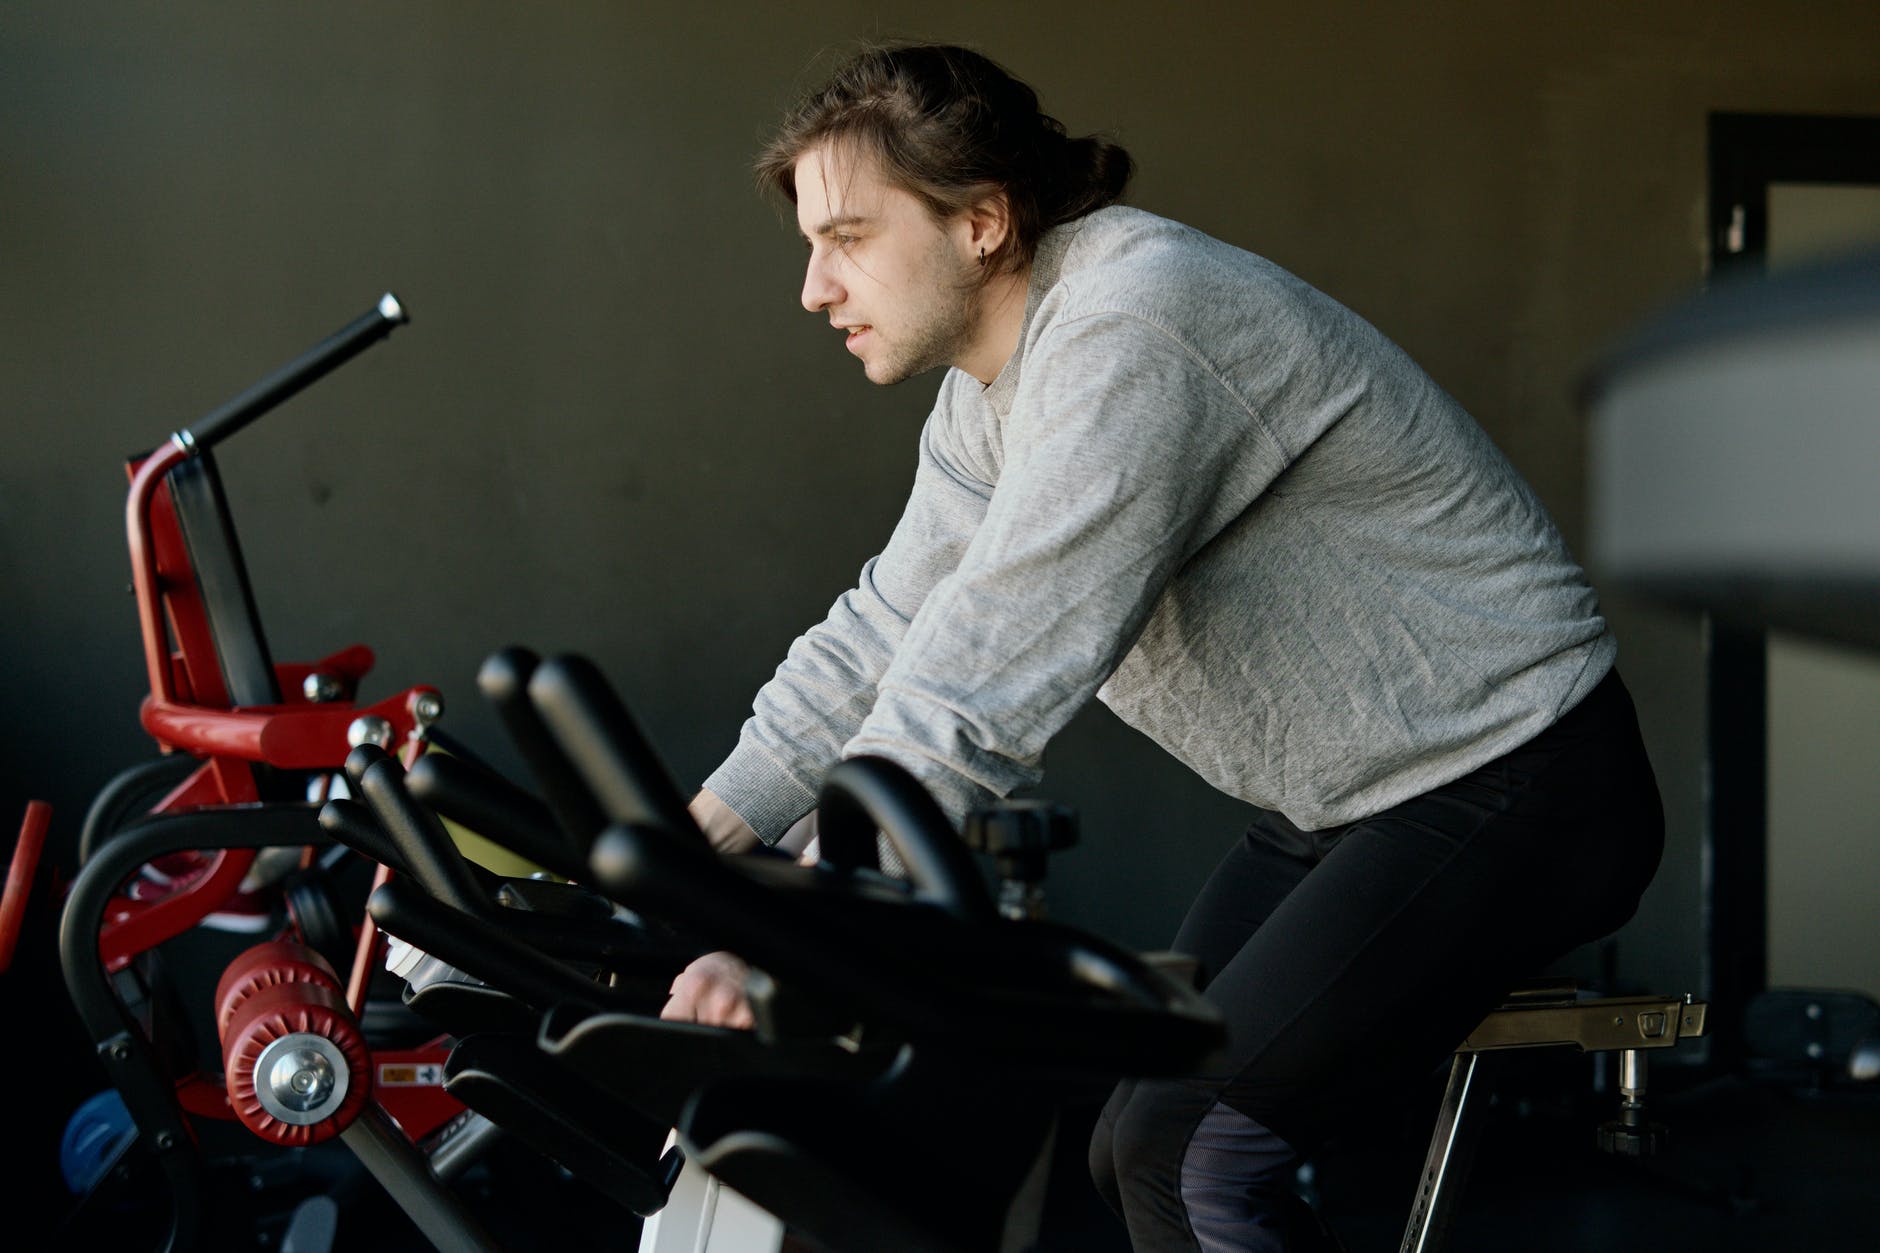 Photo by Ivan Samkov on <a href="https://www.pexels.com/photo/man-on-an-exercise-bike-at-the-gym-4162580/" rel="nofollow">Pexels.com</a>